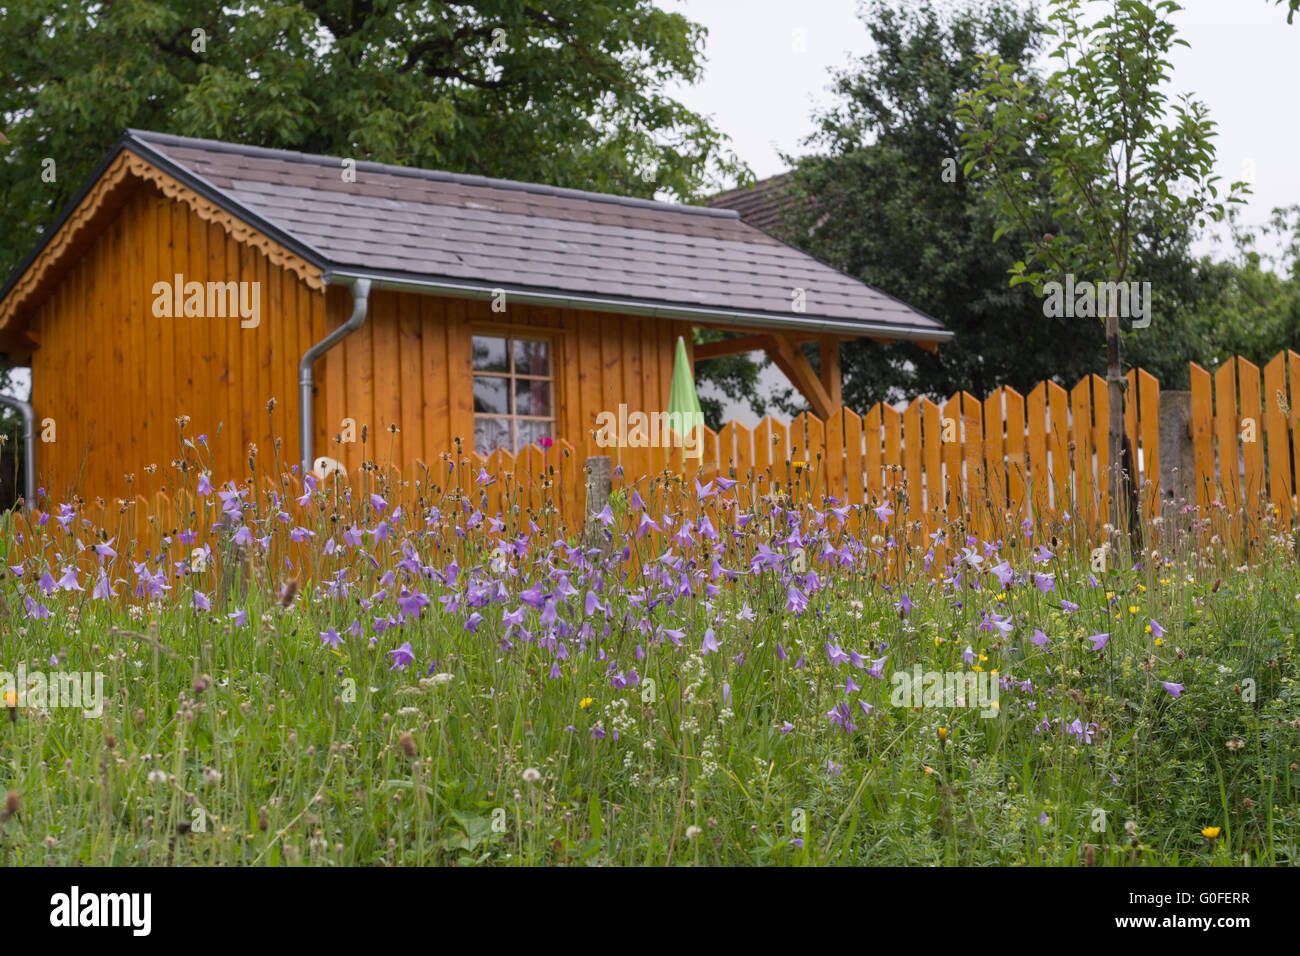 Garden house with an enclosed garden, in front of bell flower meadow Stock Photo